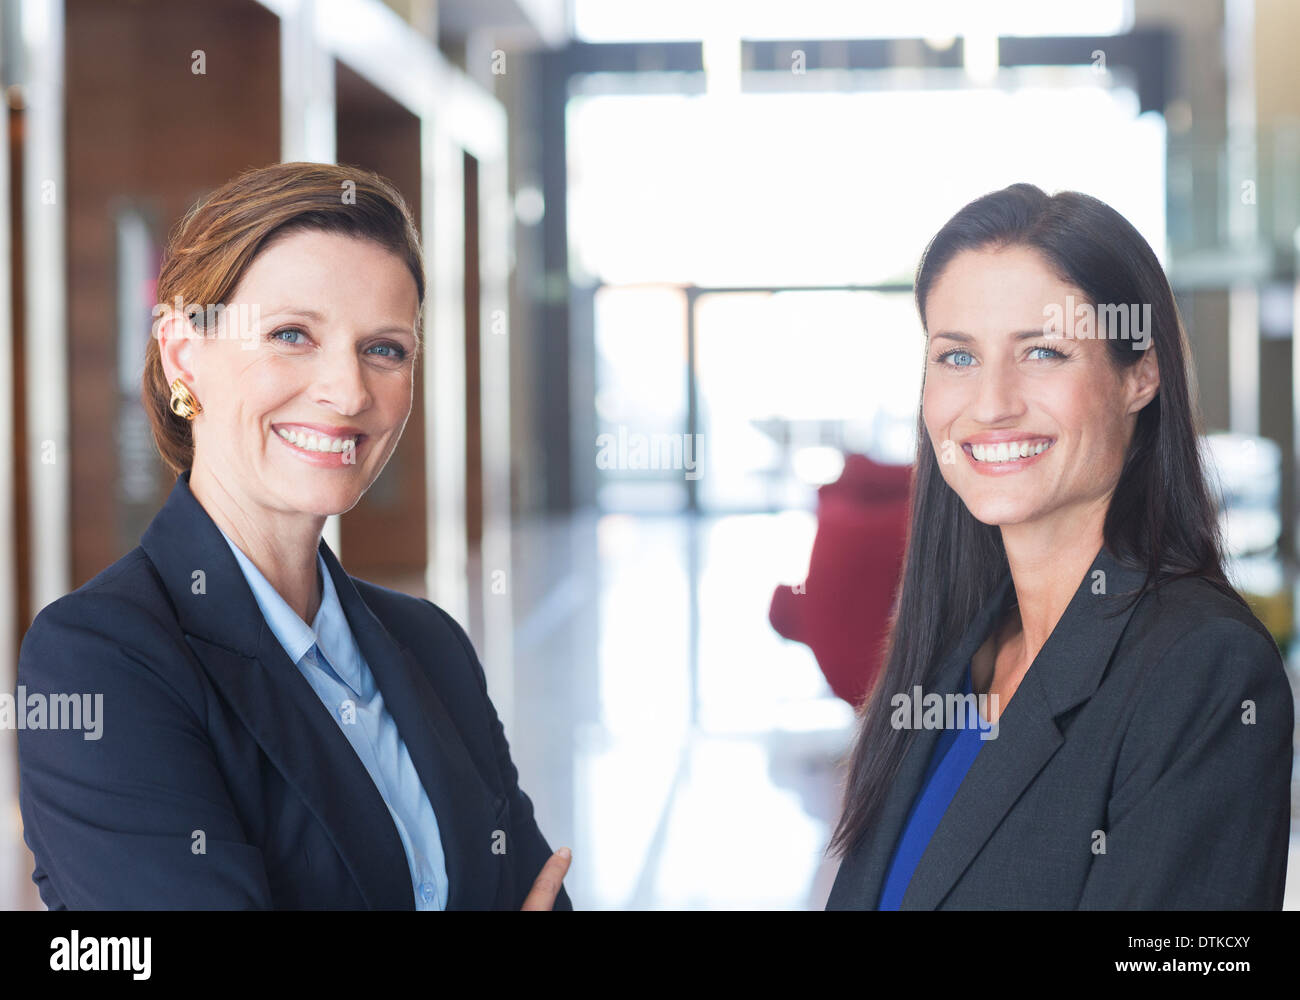 Businesswomen smiling in lobby Banque D'Images